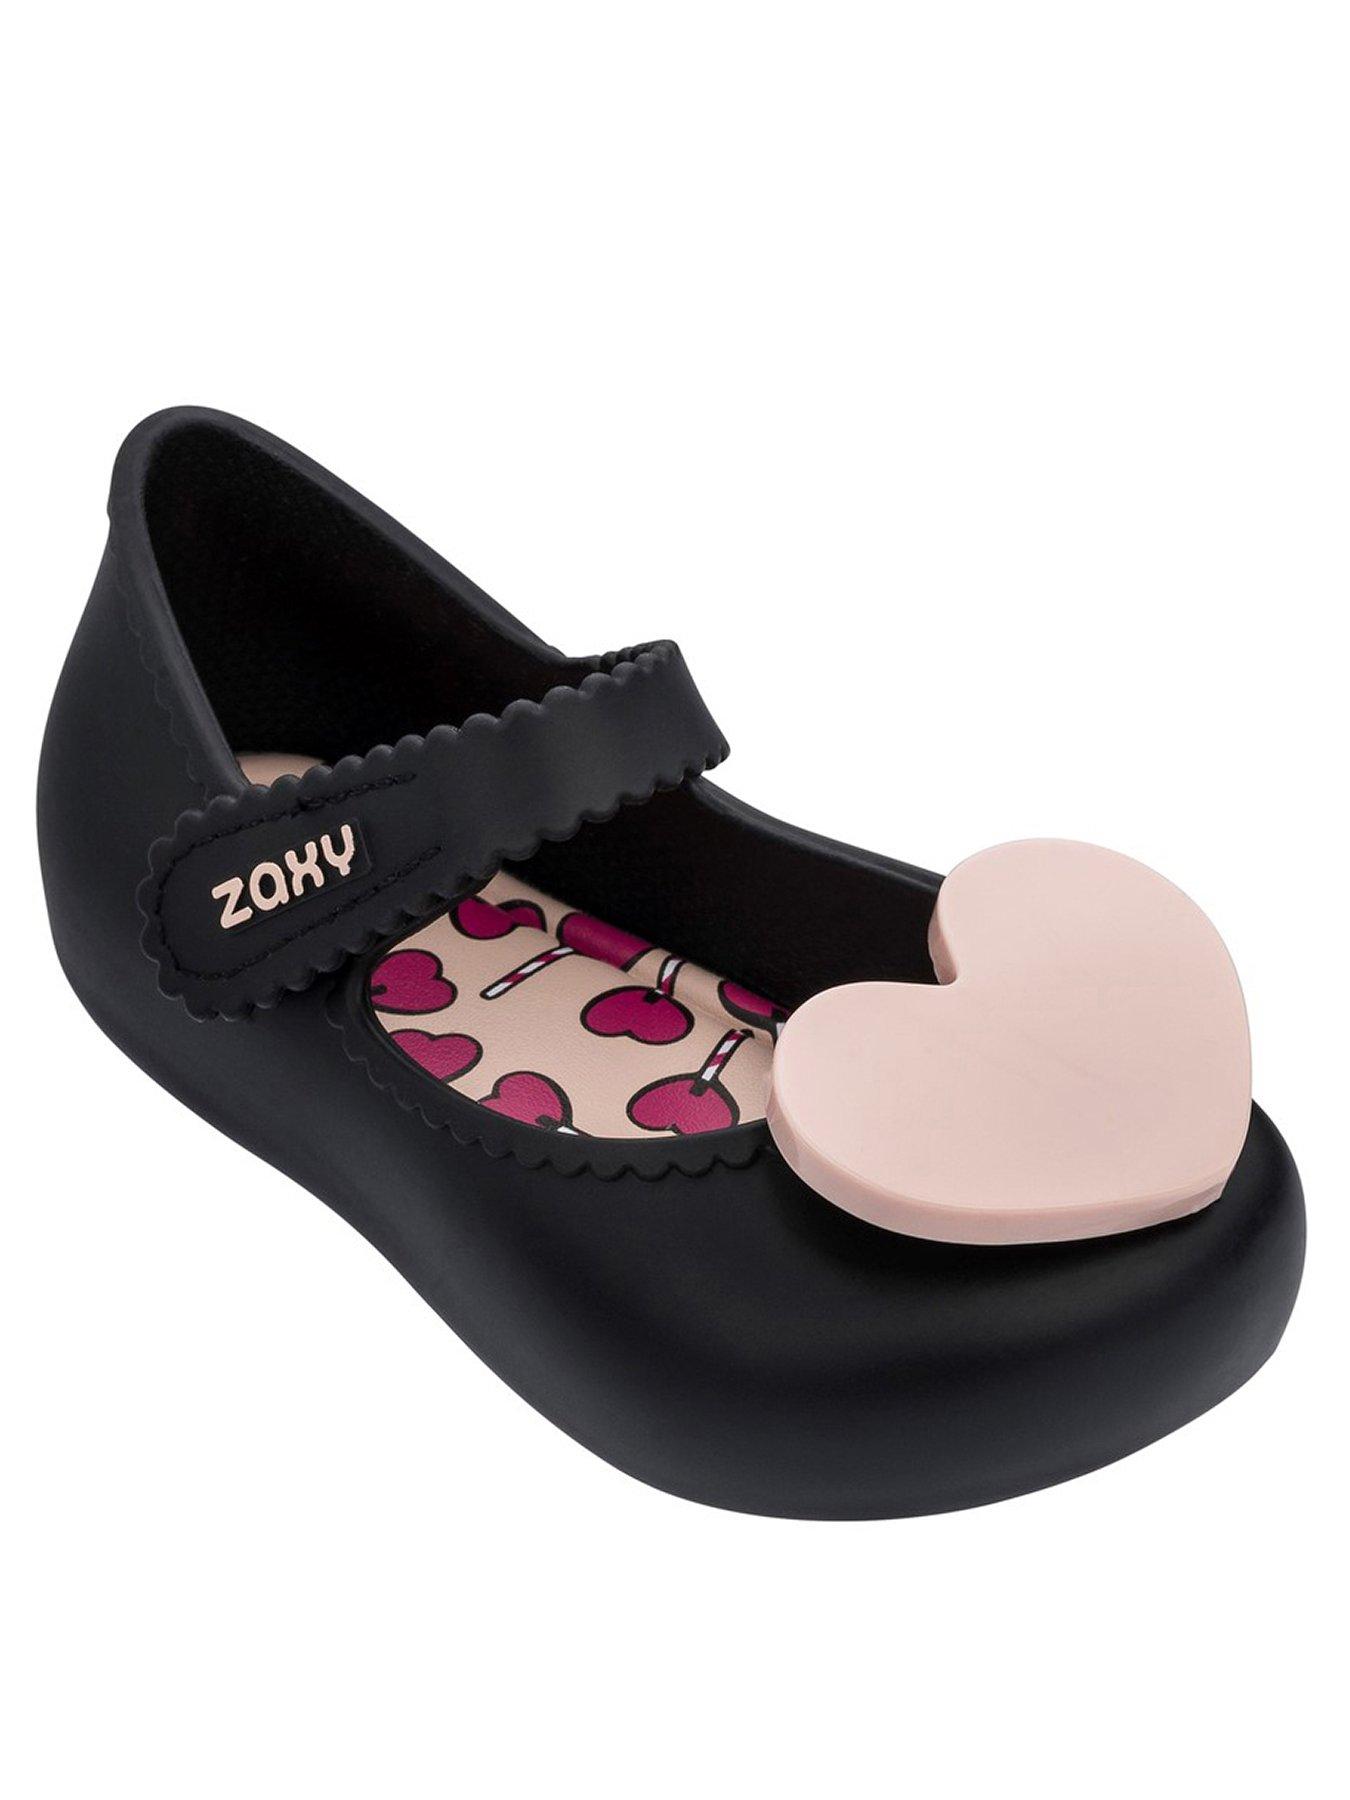 Kids Baby Love Heart Shoes